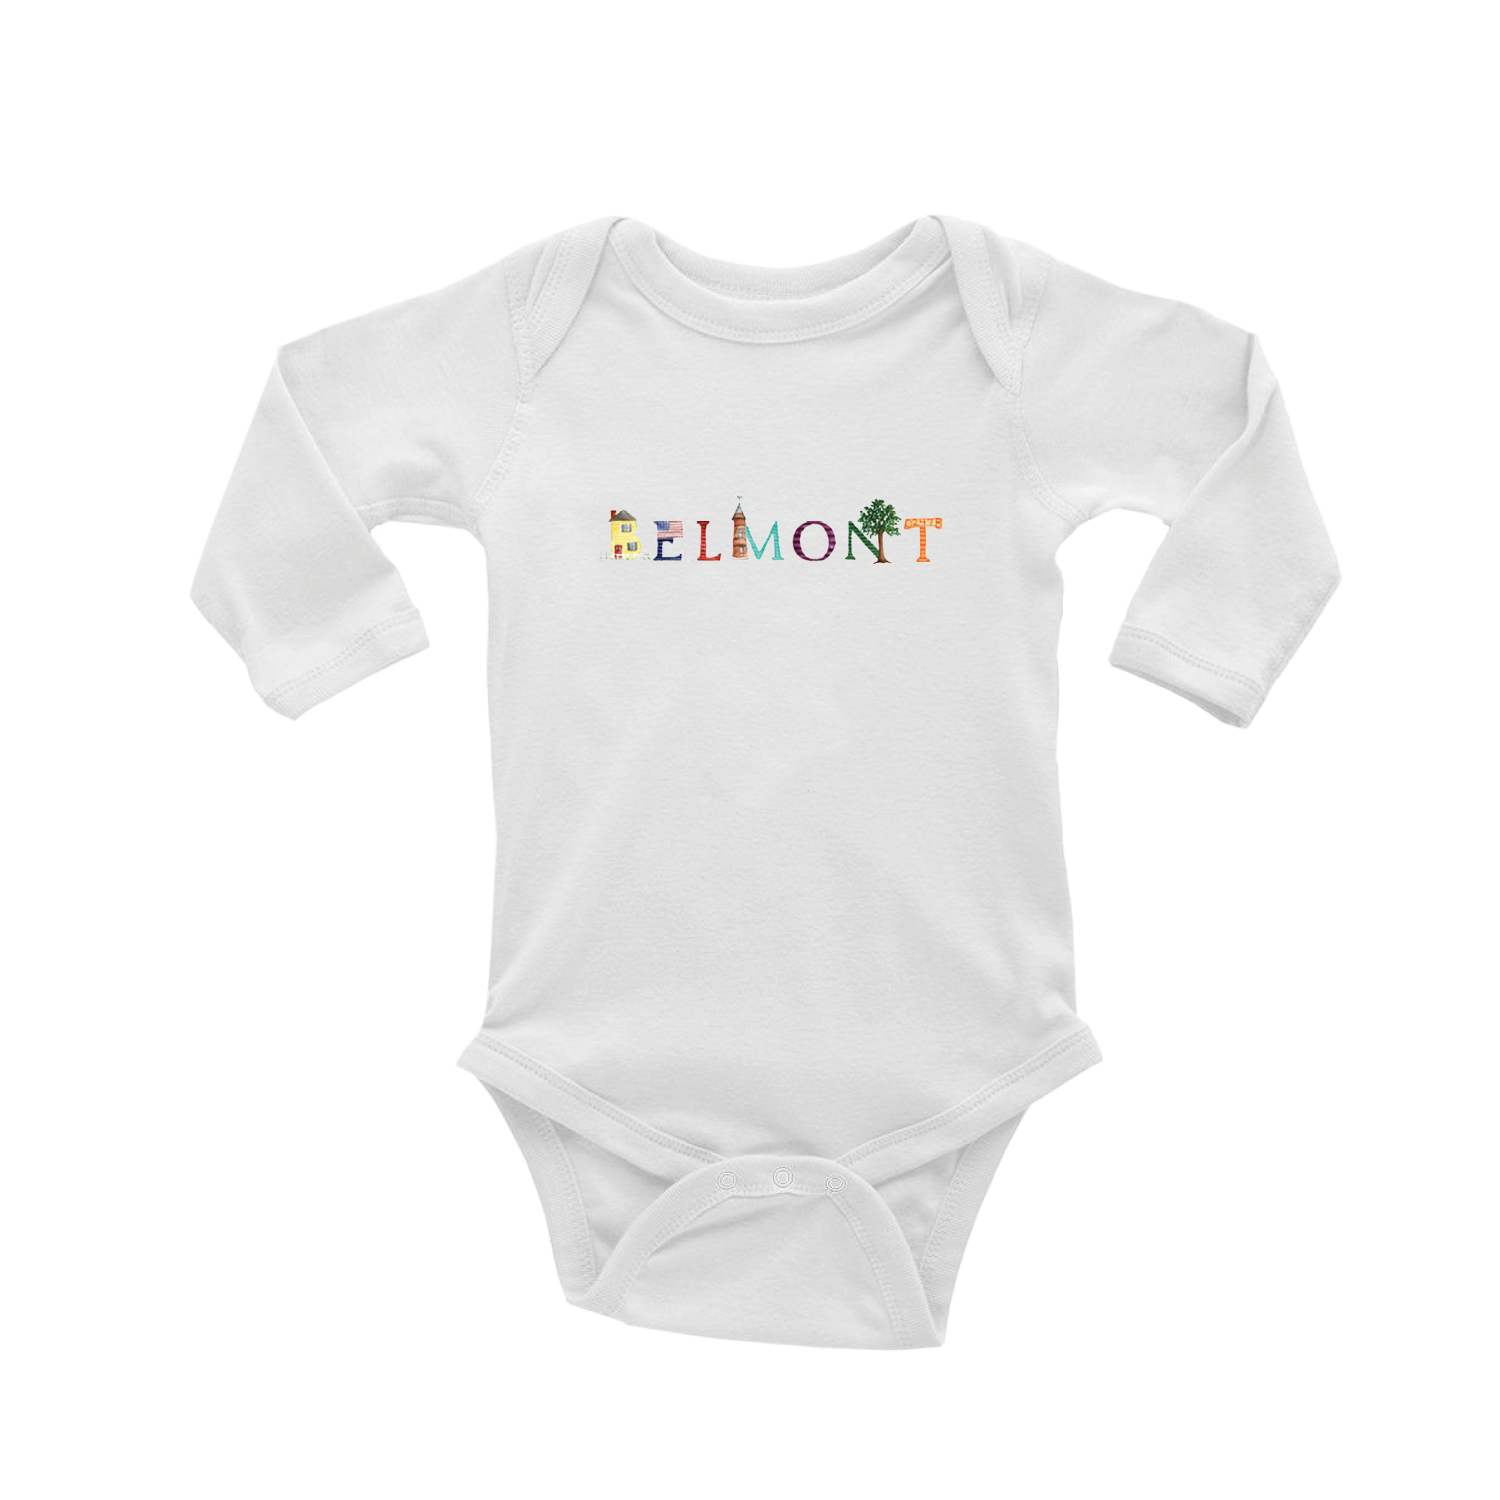 Belmont baby snap up long sleeve